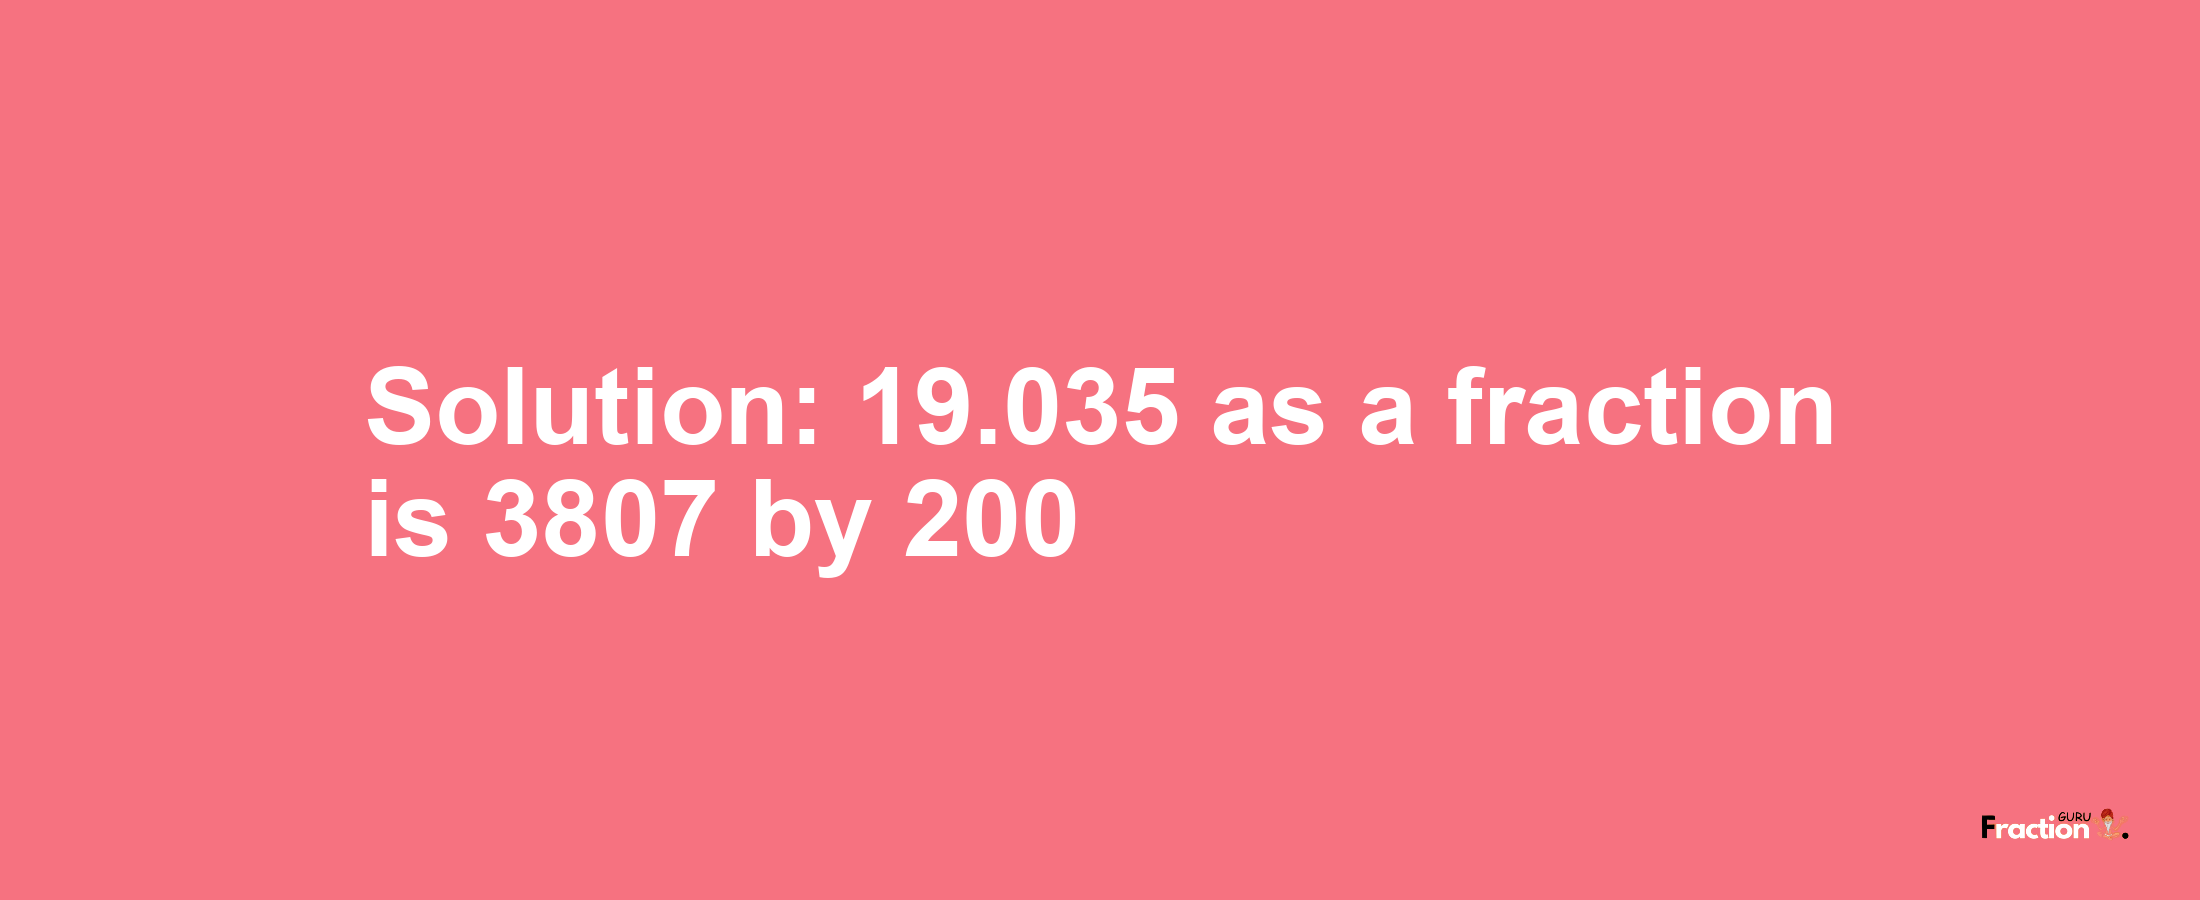 Solution:19.035 as a fraction is 3807/200